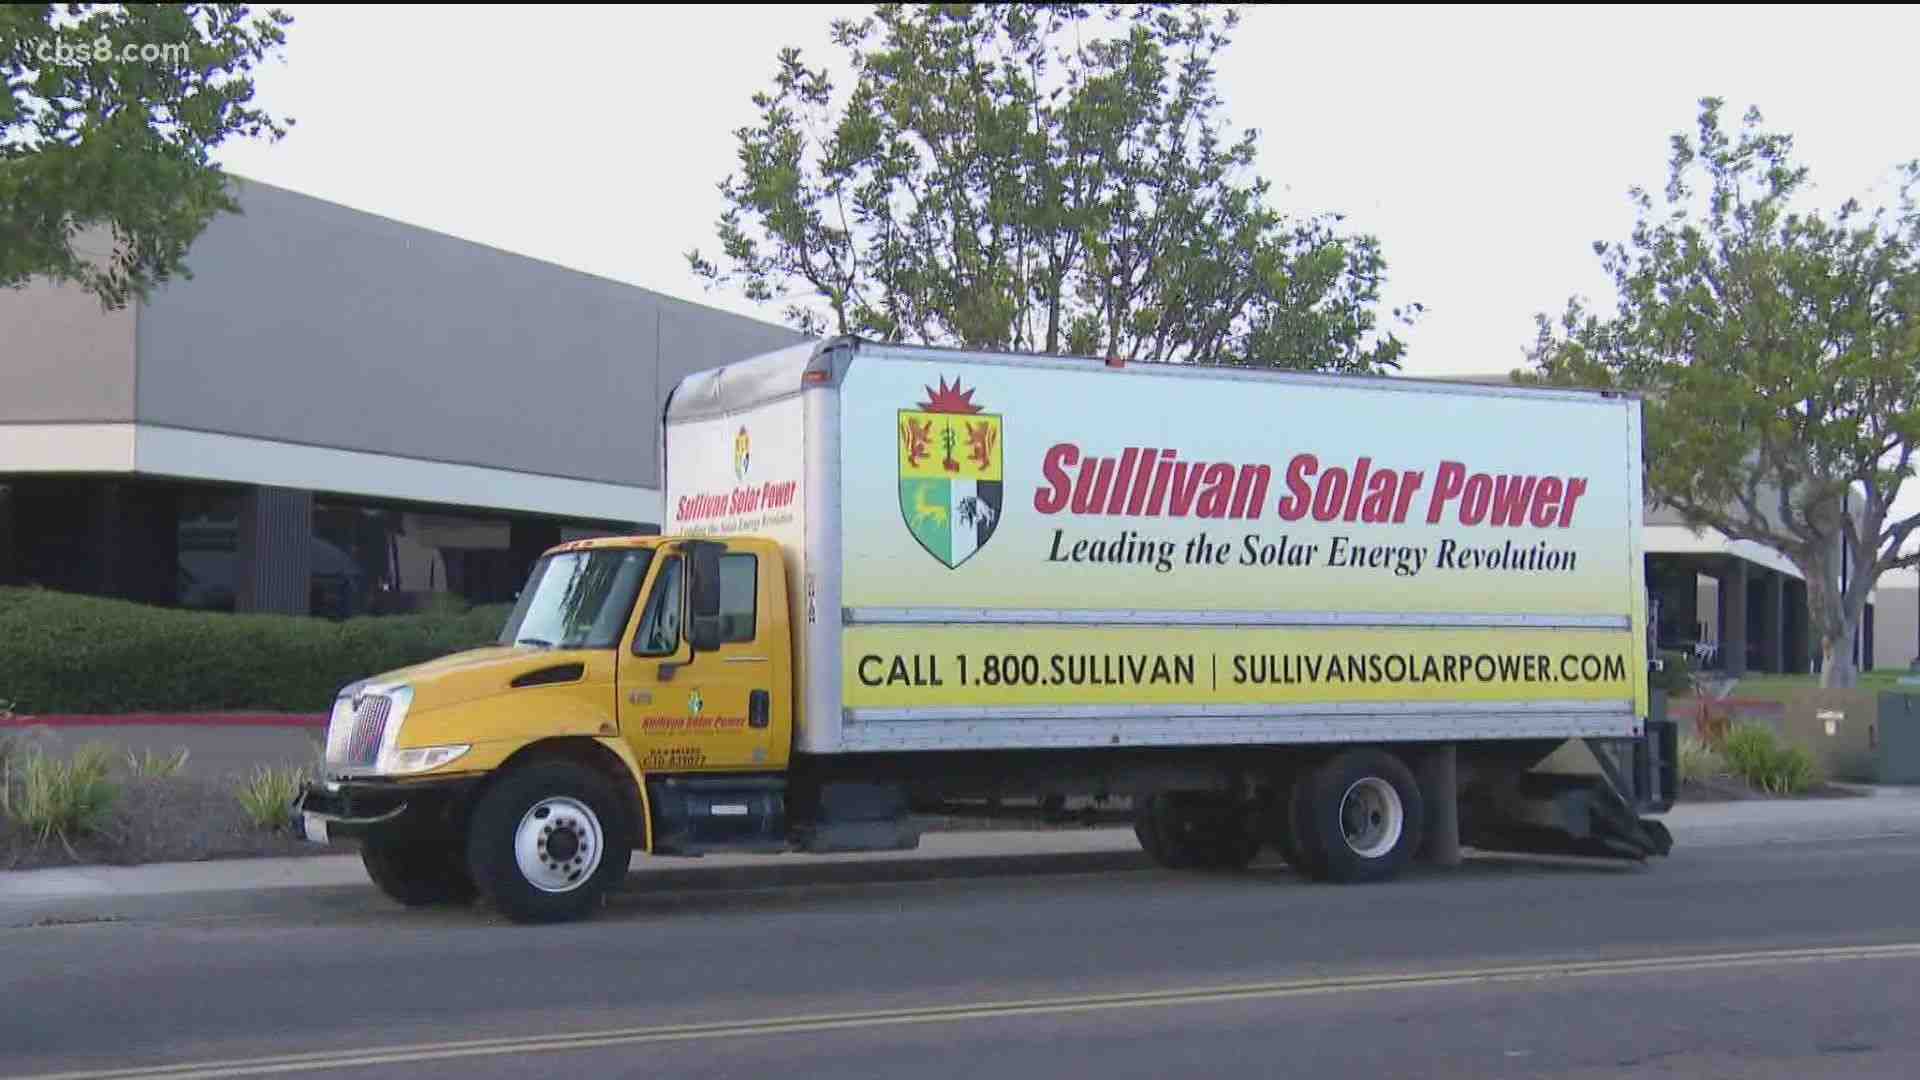 Do you pay monthly for solar panels?